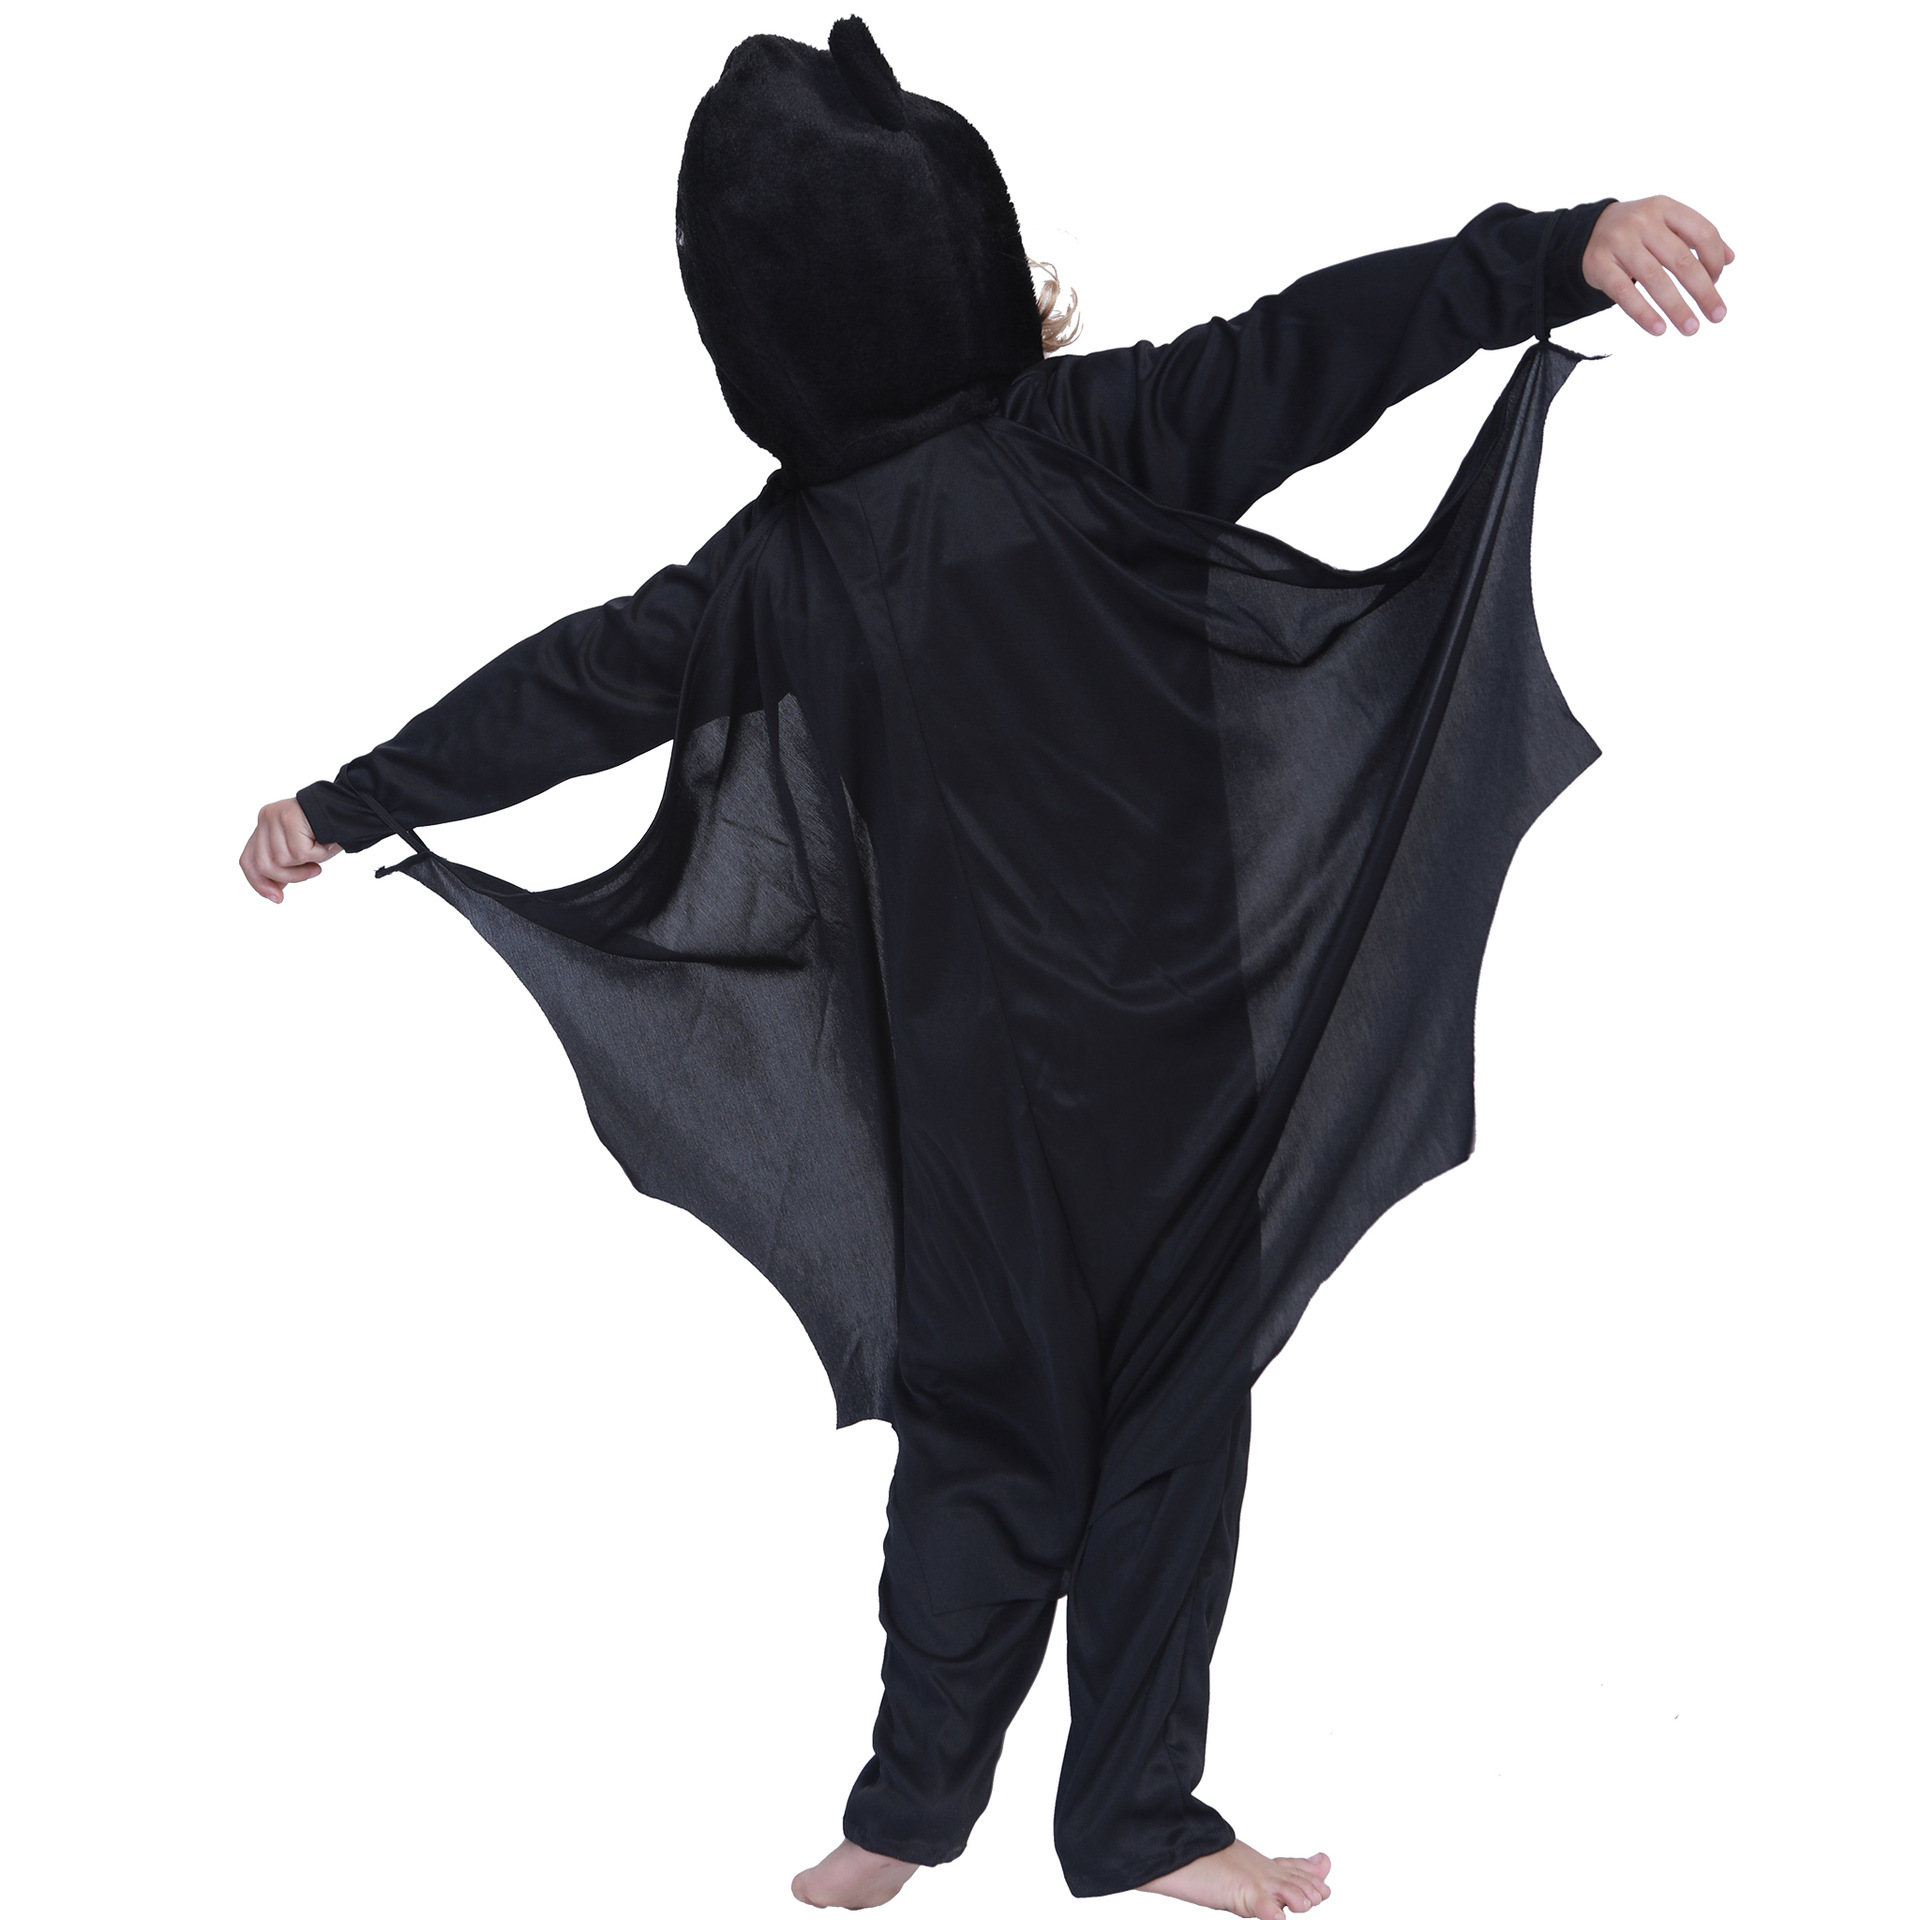 Neutral Children's Performance Wear Jumpsuit Animal Bat Suit Modeling Outfit Halloween Children's Clothing Stage Costume